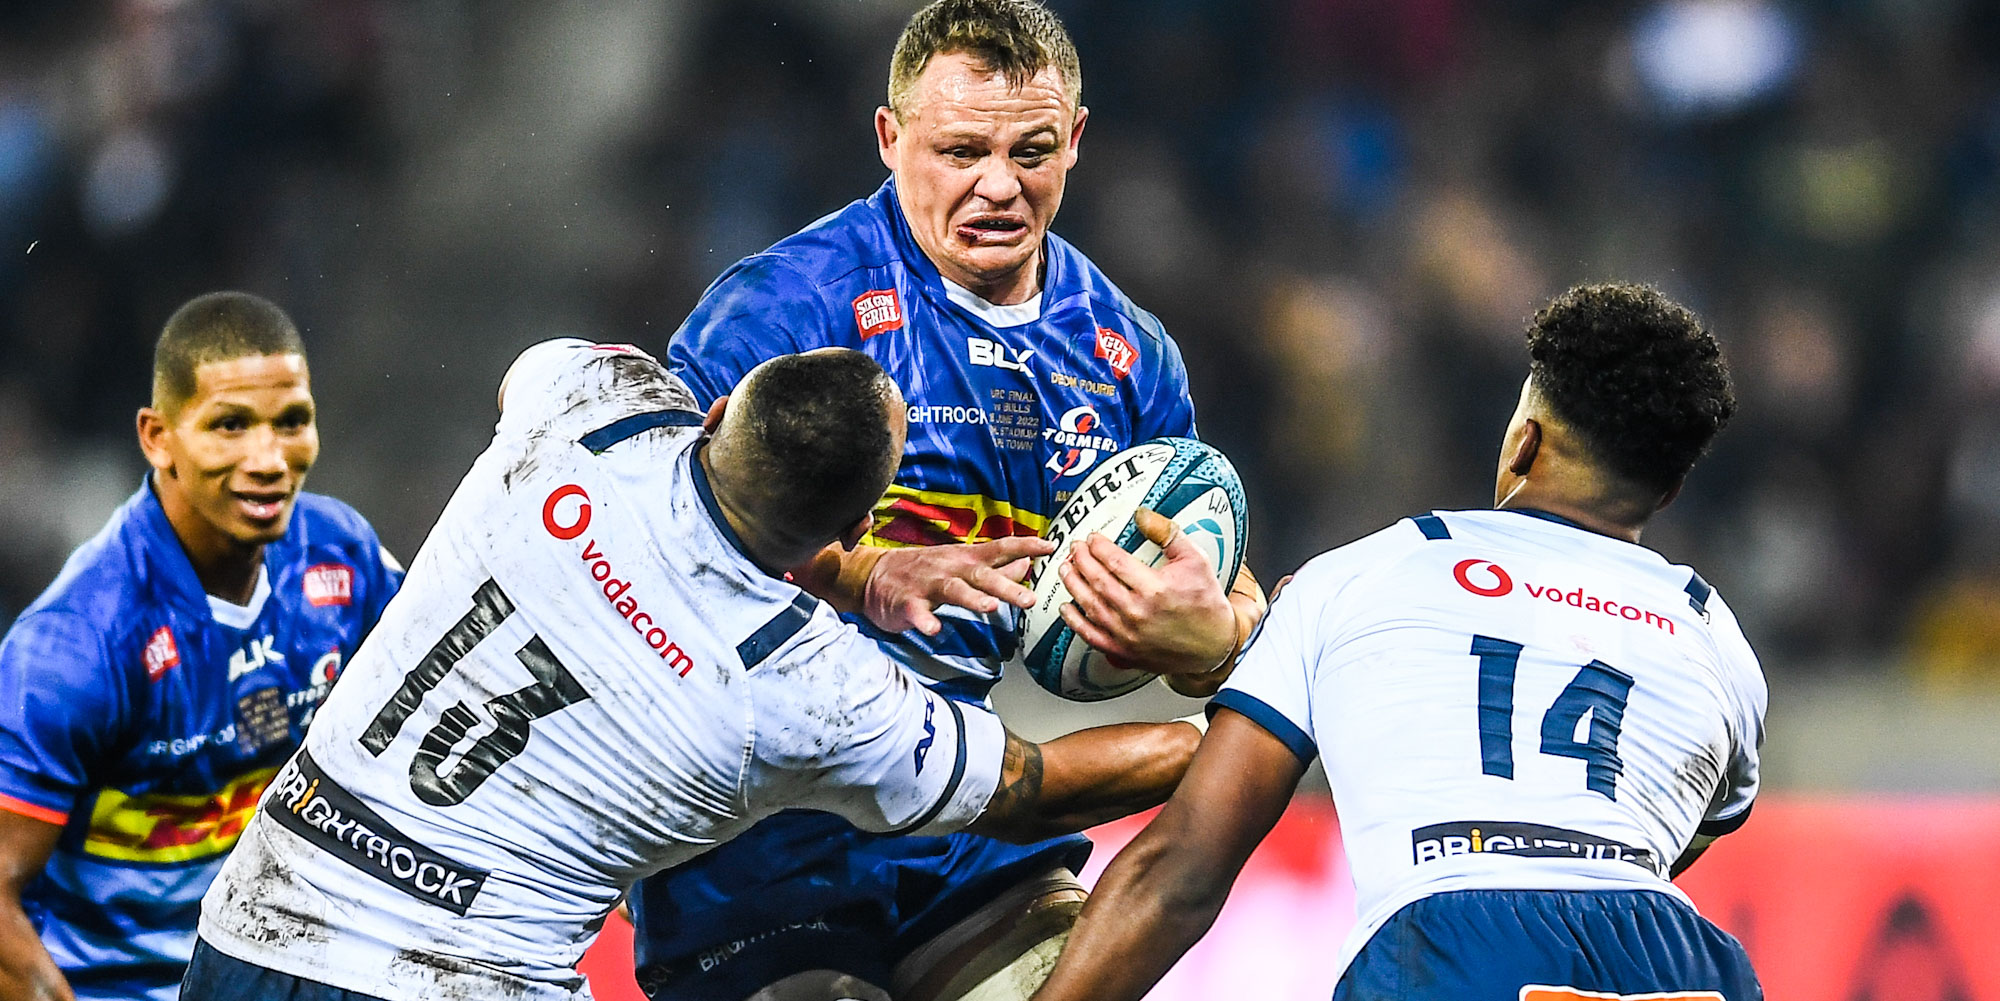 Playing in his 100th match for the DHL Stormers, Deon Fourie was named Man of the Match in the Grand Final.